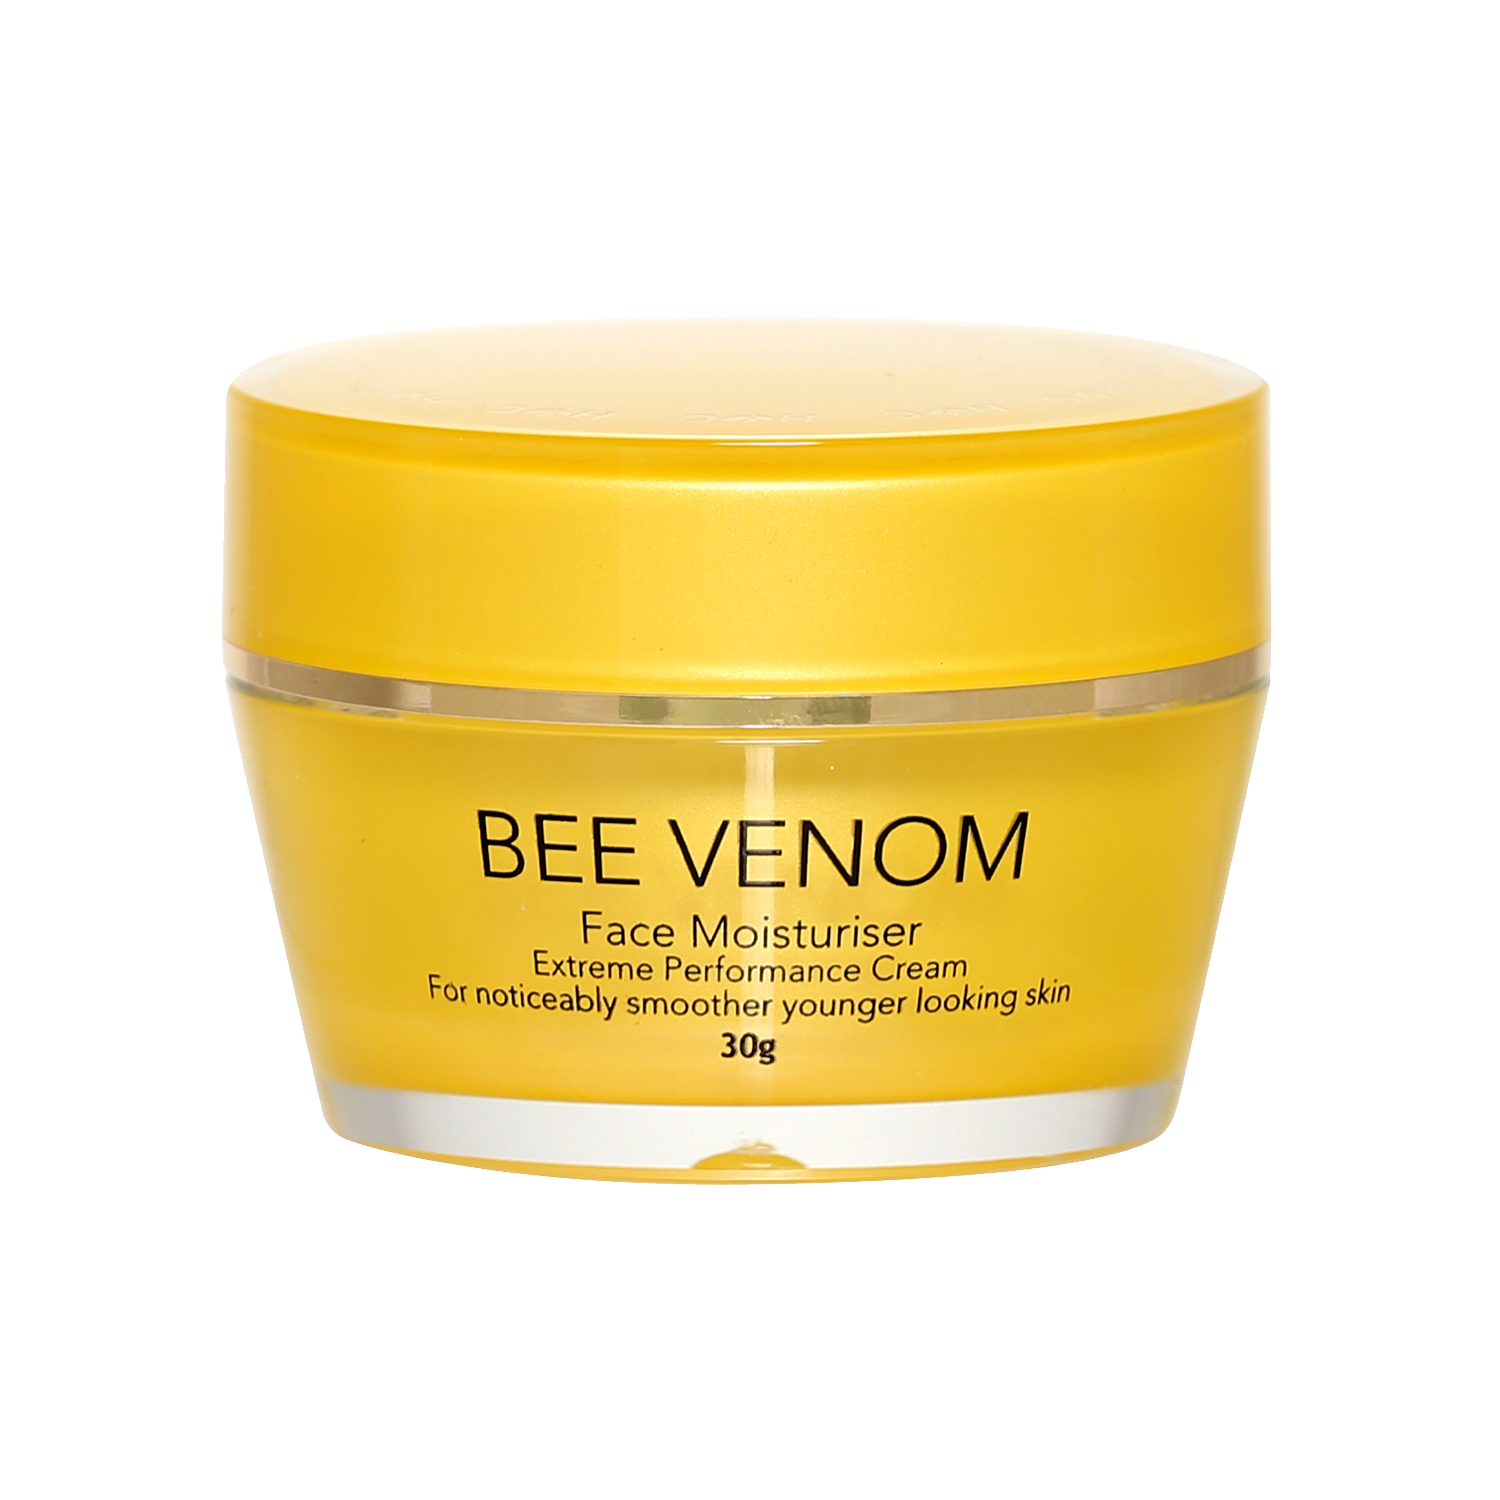 Bee Venom Face Moisturiser 30g (For smoother, younger looking skin)-Lotion & Moisturizer-Healthy Care Australia